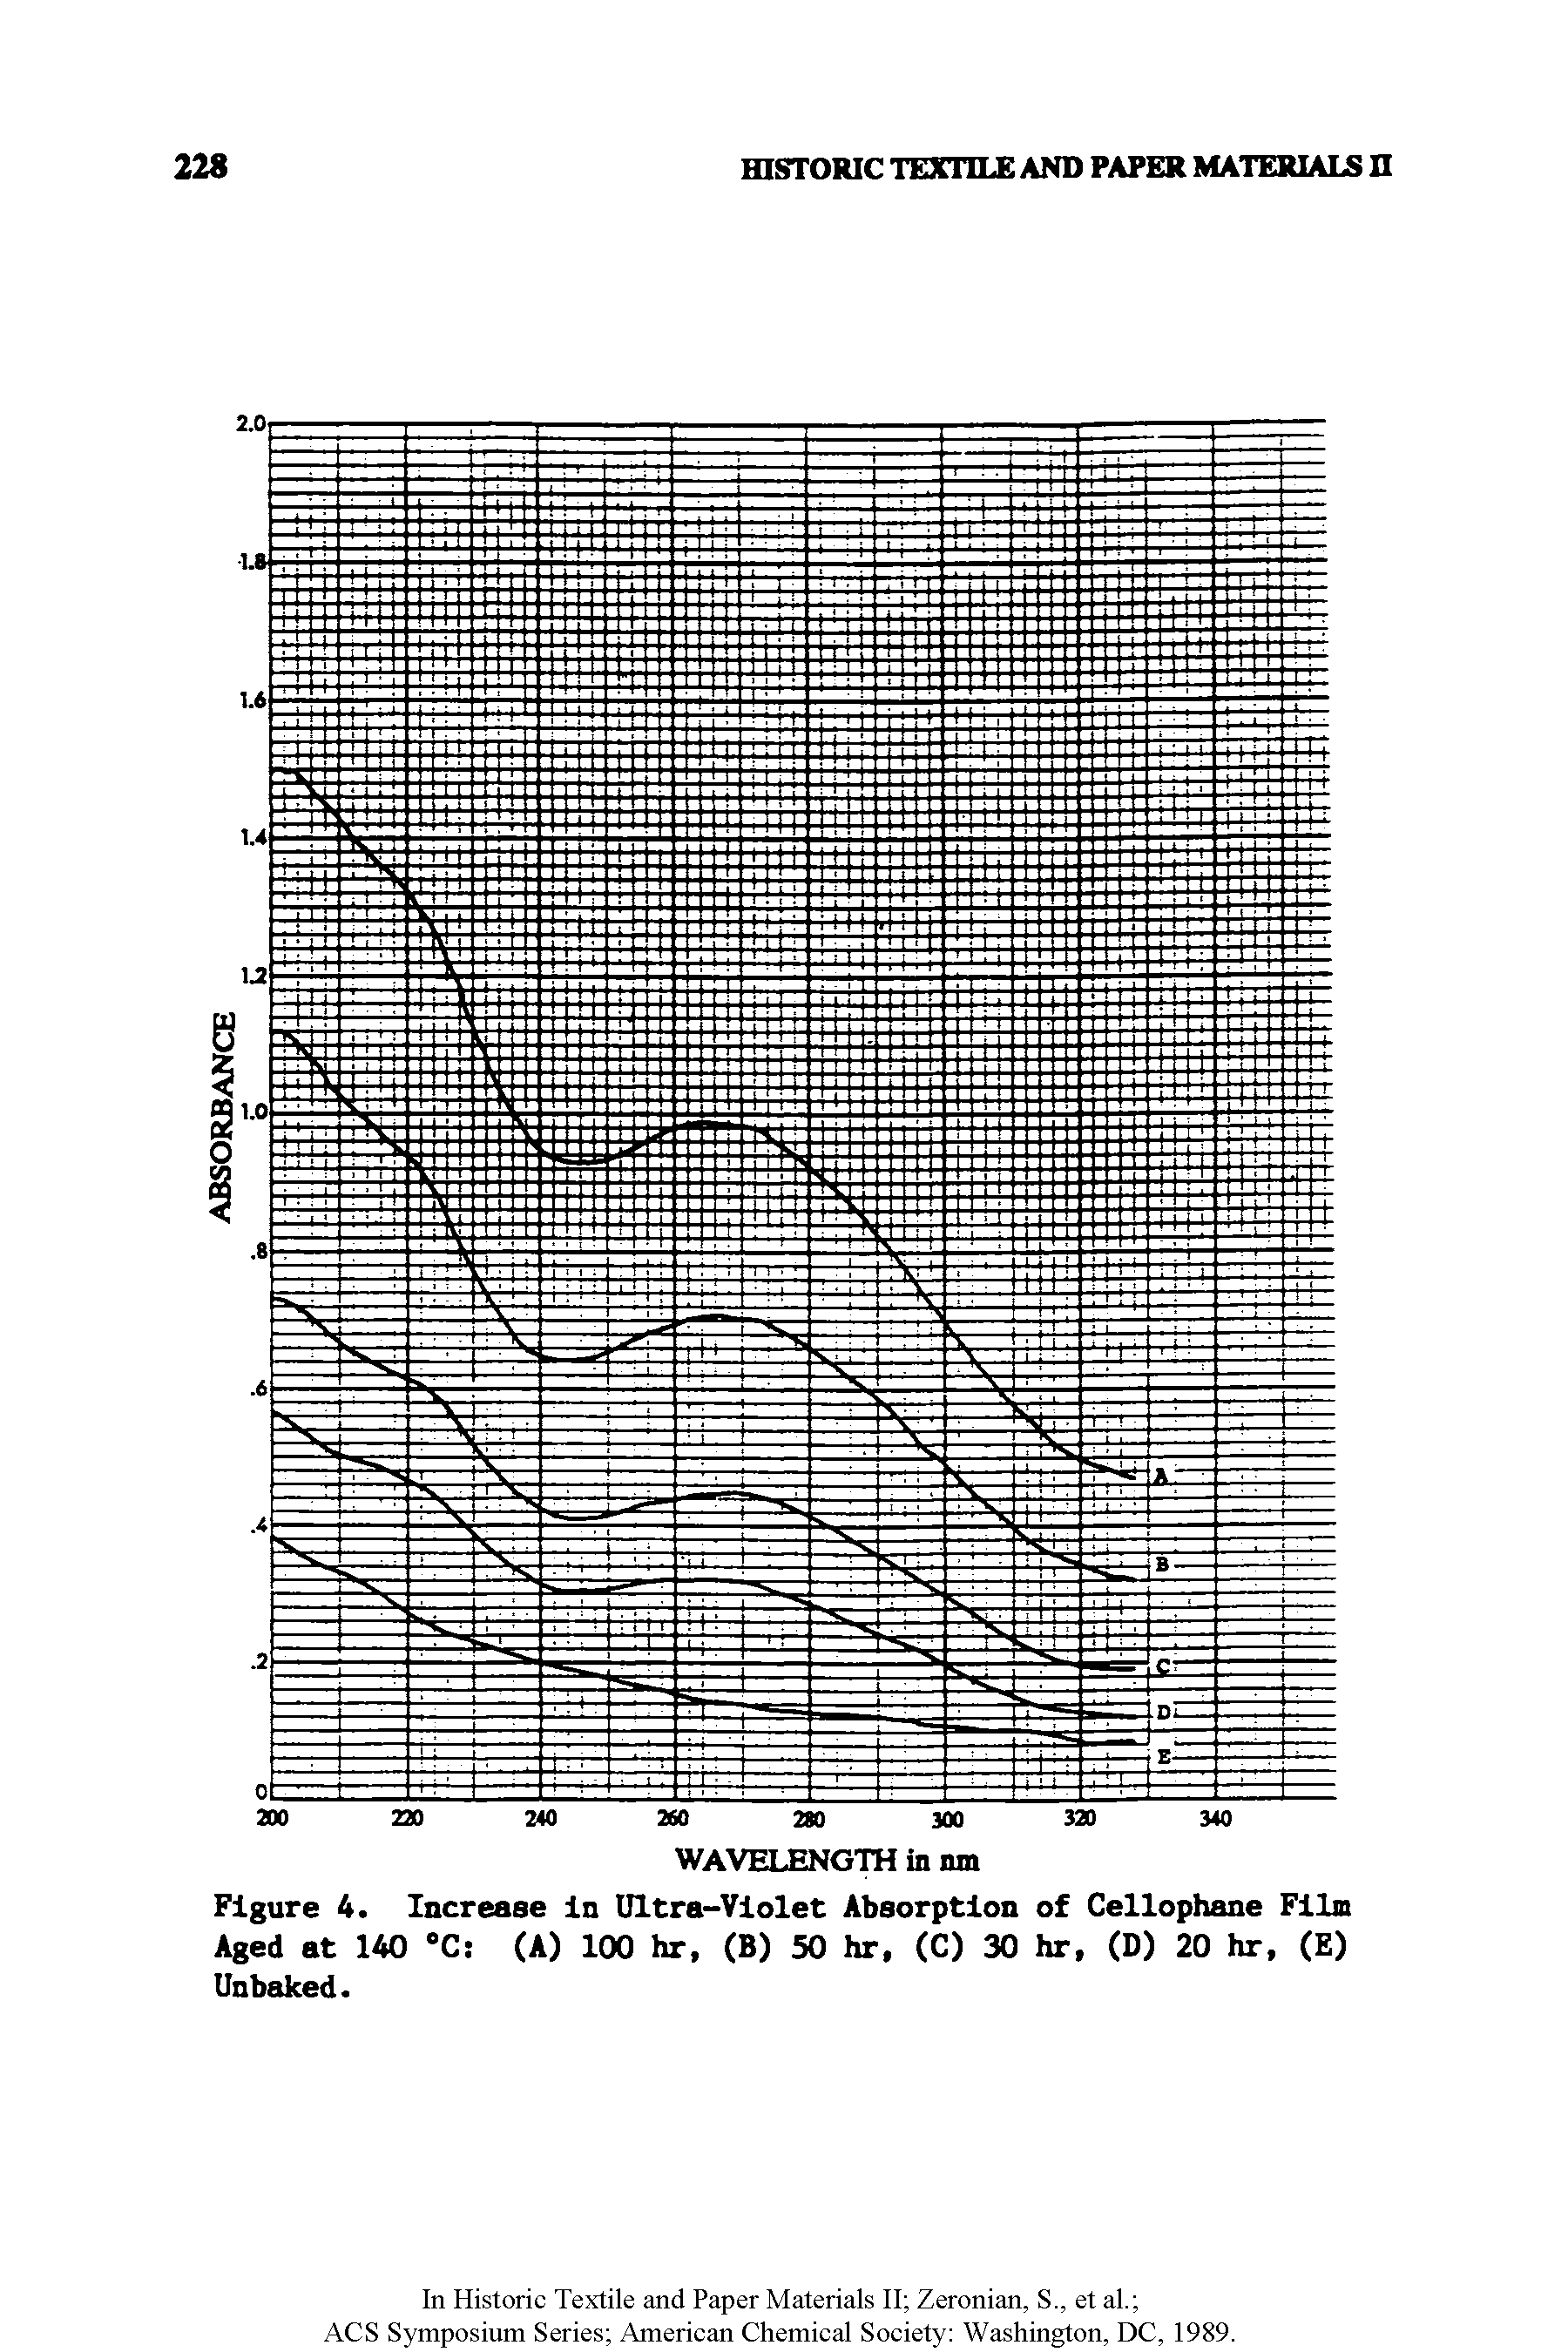 Figure 4. Increase in Ultra-Violet Absorption of Cellophane Film Aged at 140 °C (A) 100 hr, (B) 50 hr, (C) 30 hr, (D) 20 hr, (E) Unbaked.